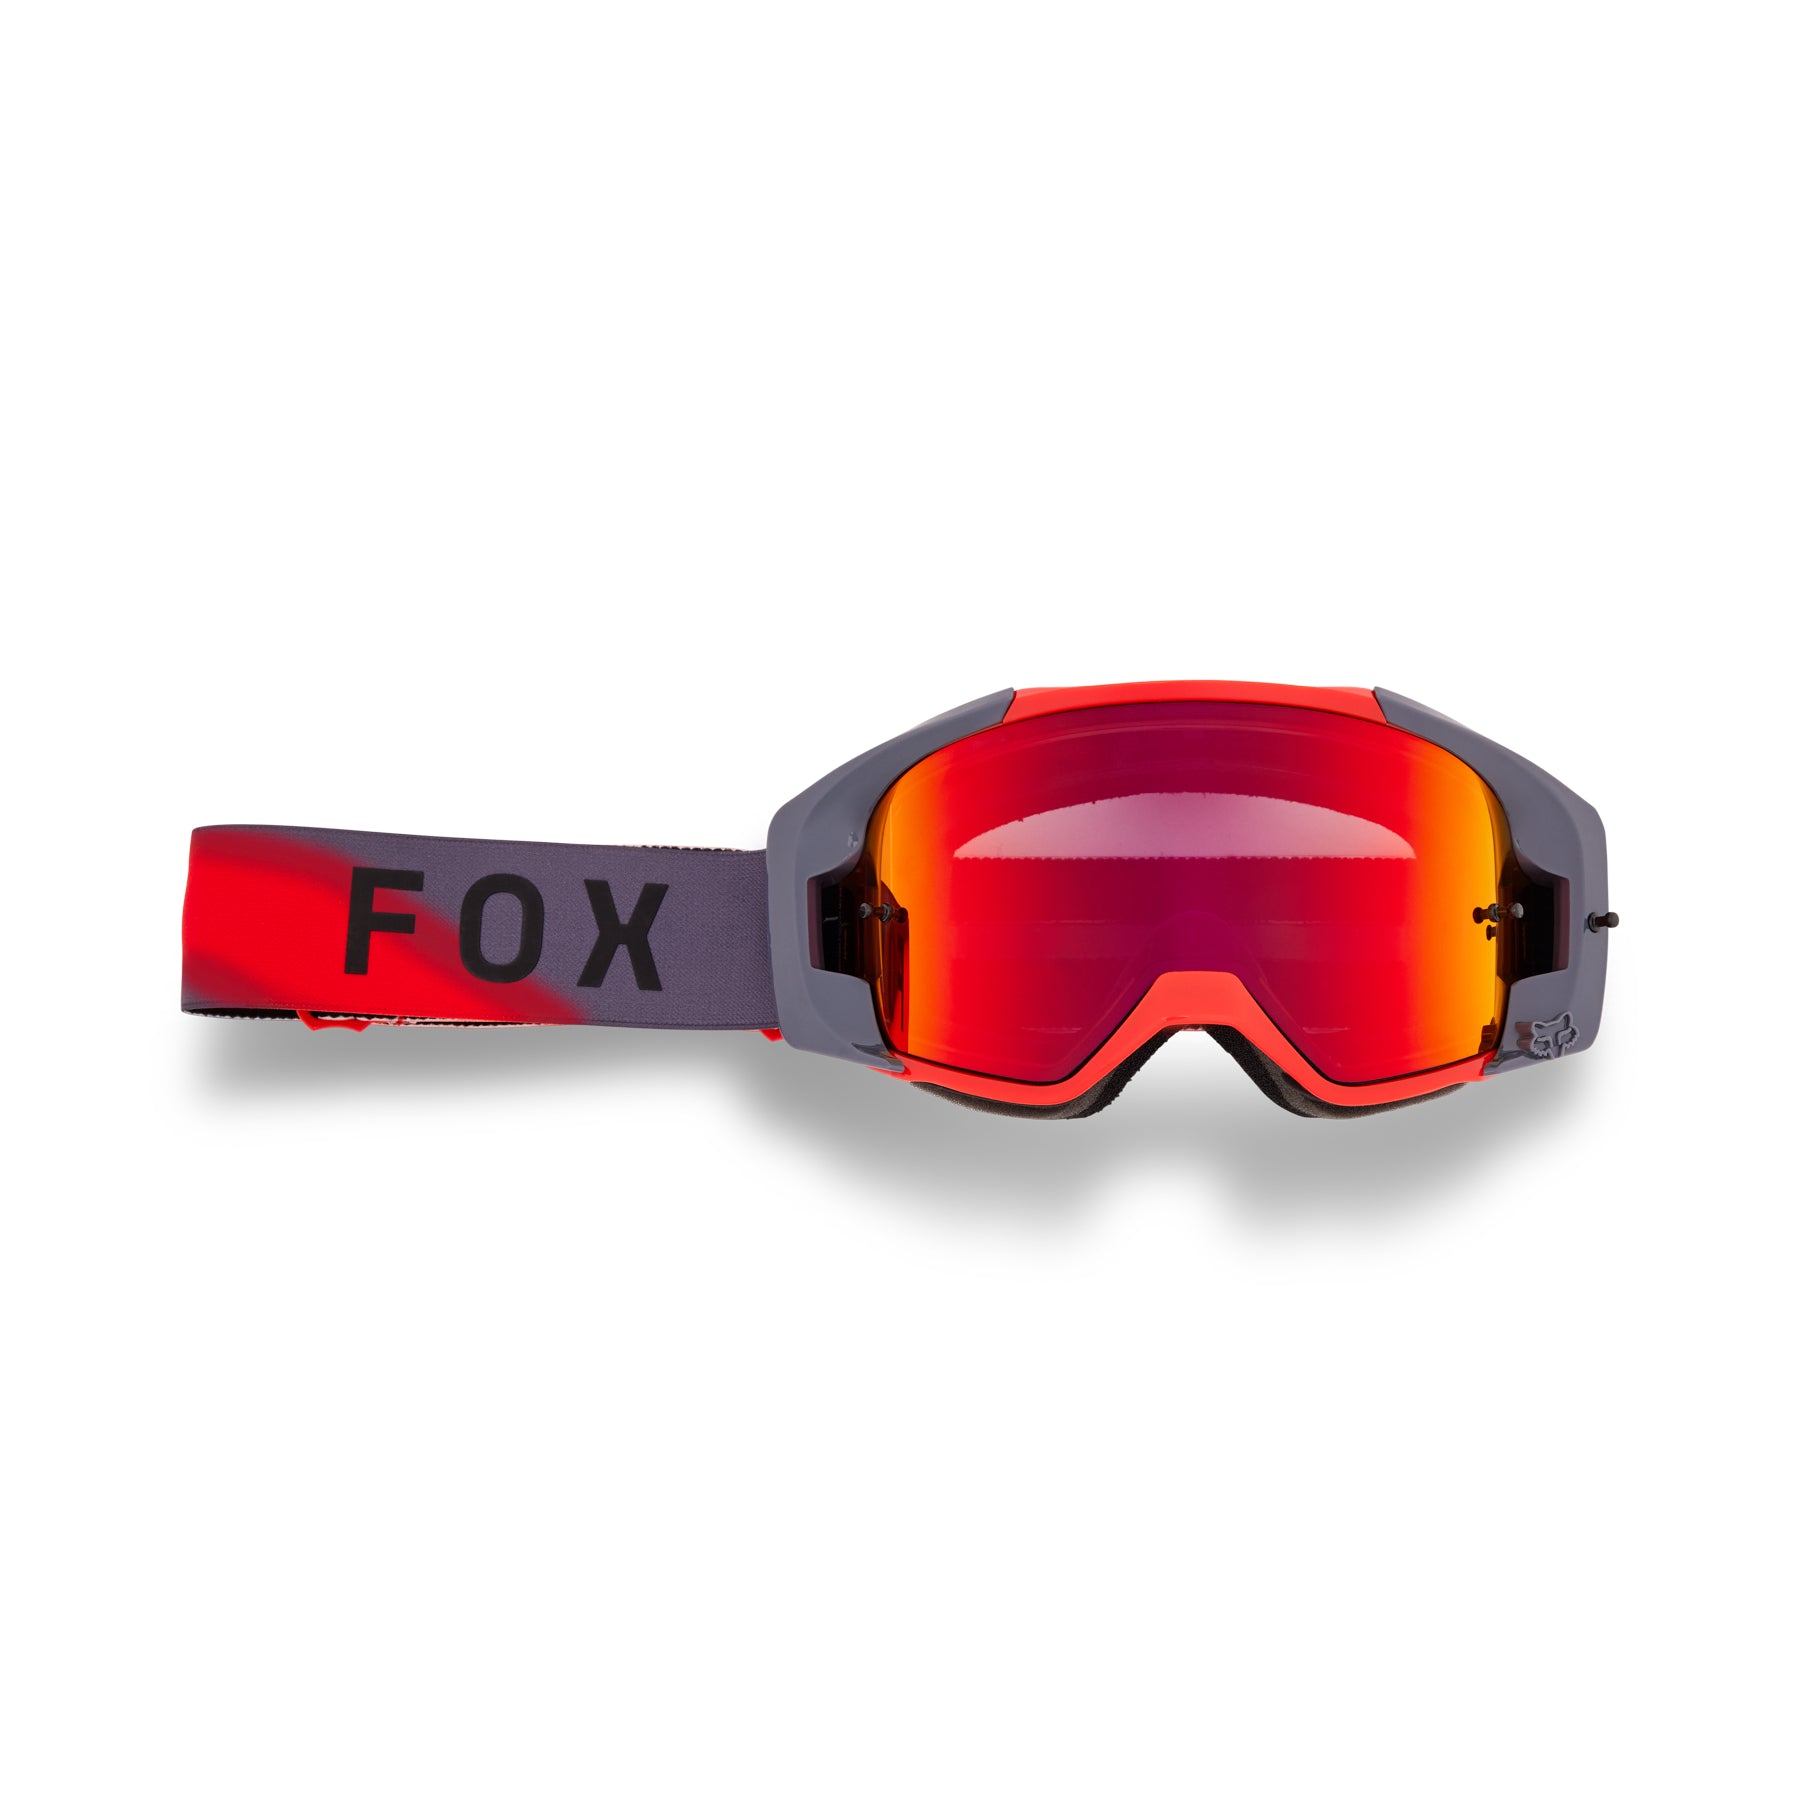 Fox Vue Volatile Goggles - One Size Fits Most - Flo Red - Spark Mirror Red Lens - Image 1